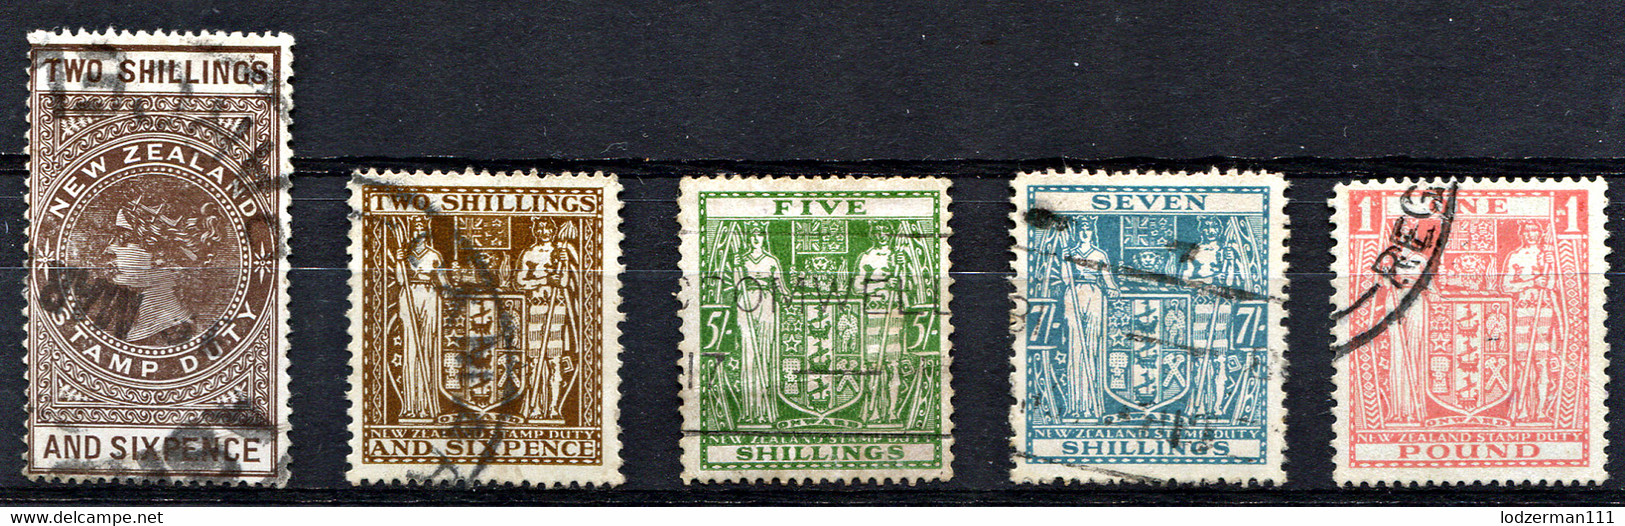 NZ 1931 Wmk NZ Close Star - Five Used Duty Stamps - Fiscal-postal